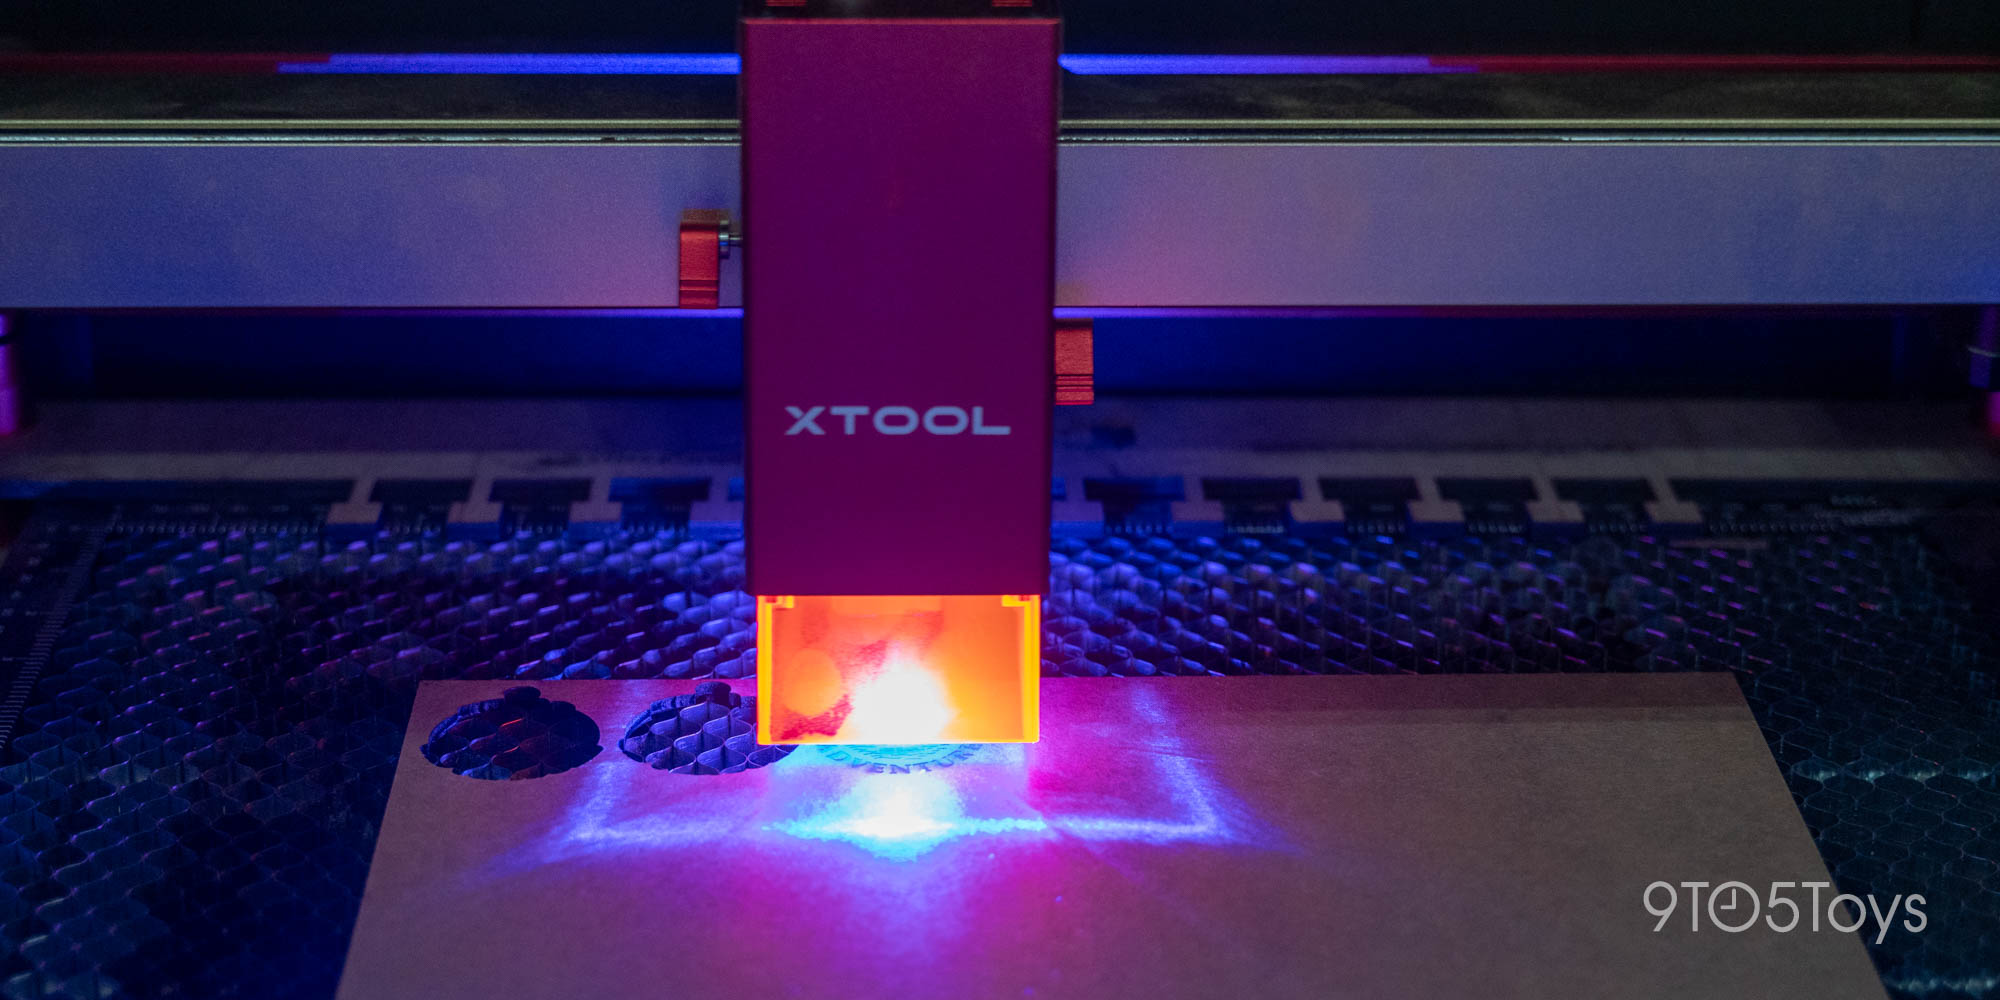 xTool D1 Pro 40W review: This 40W diode laser is really powerful